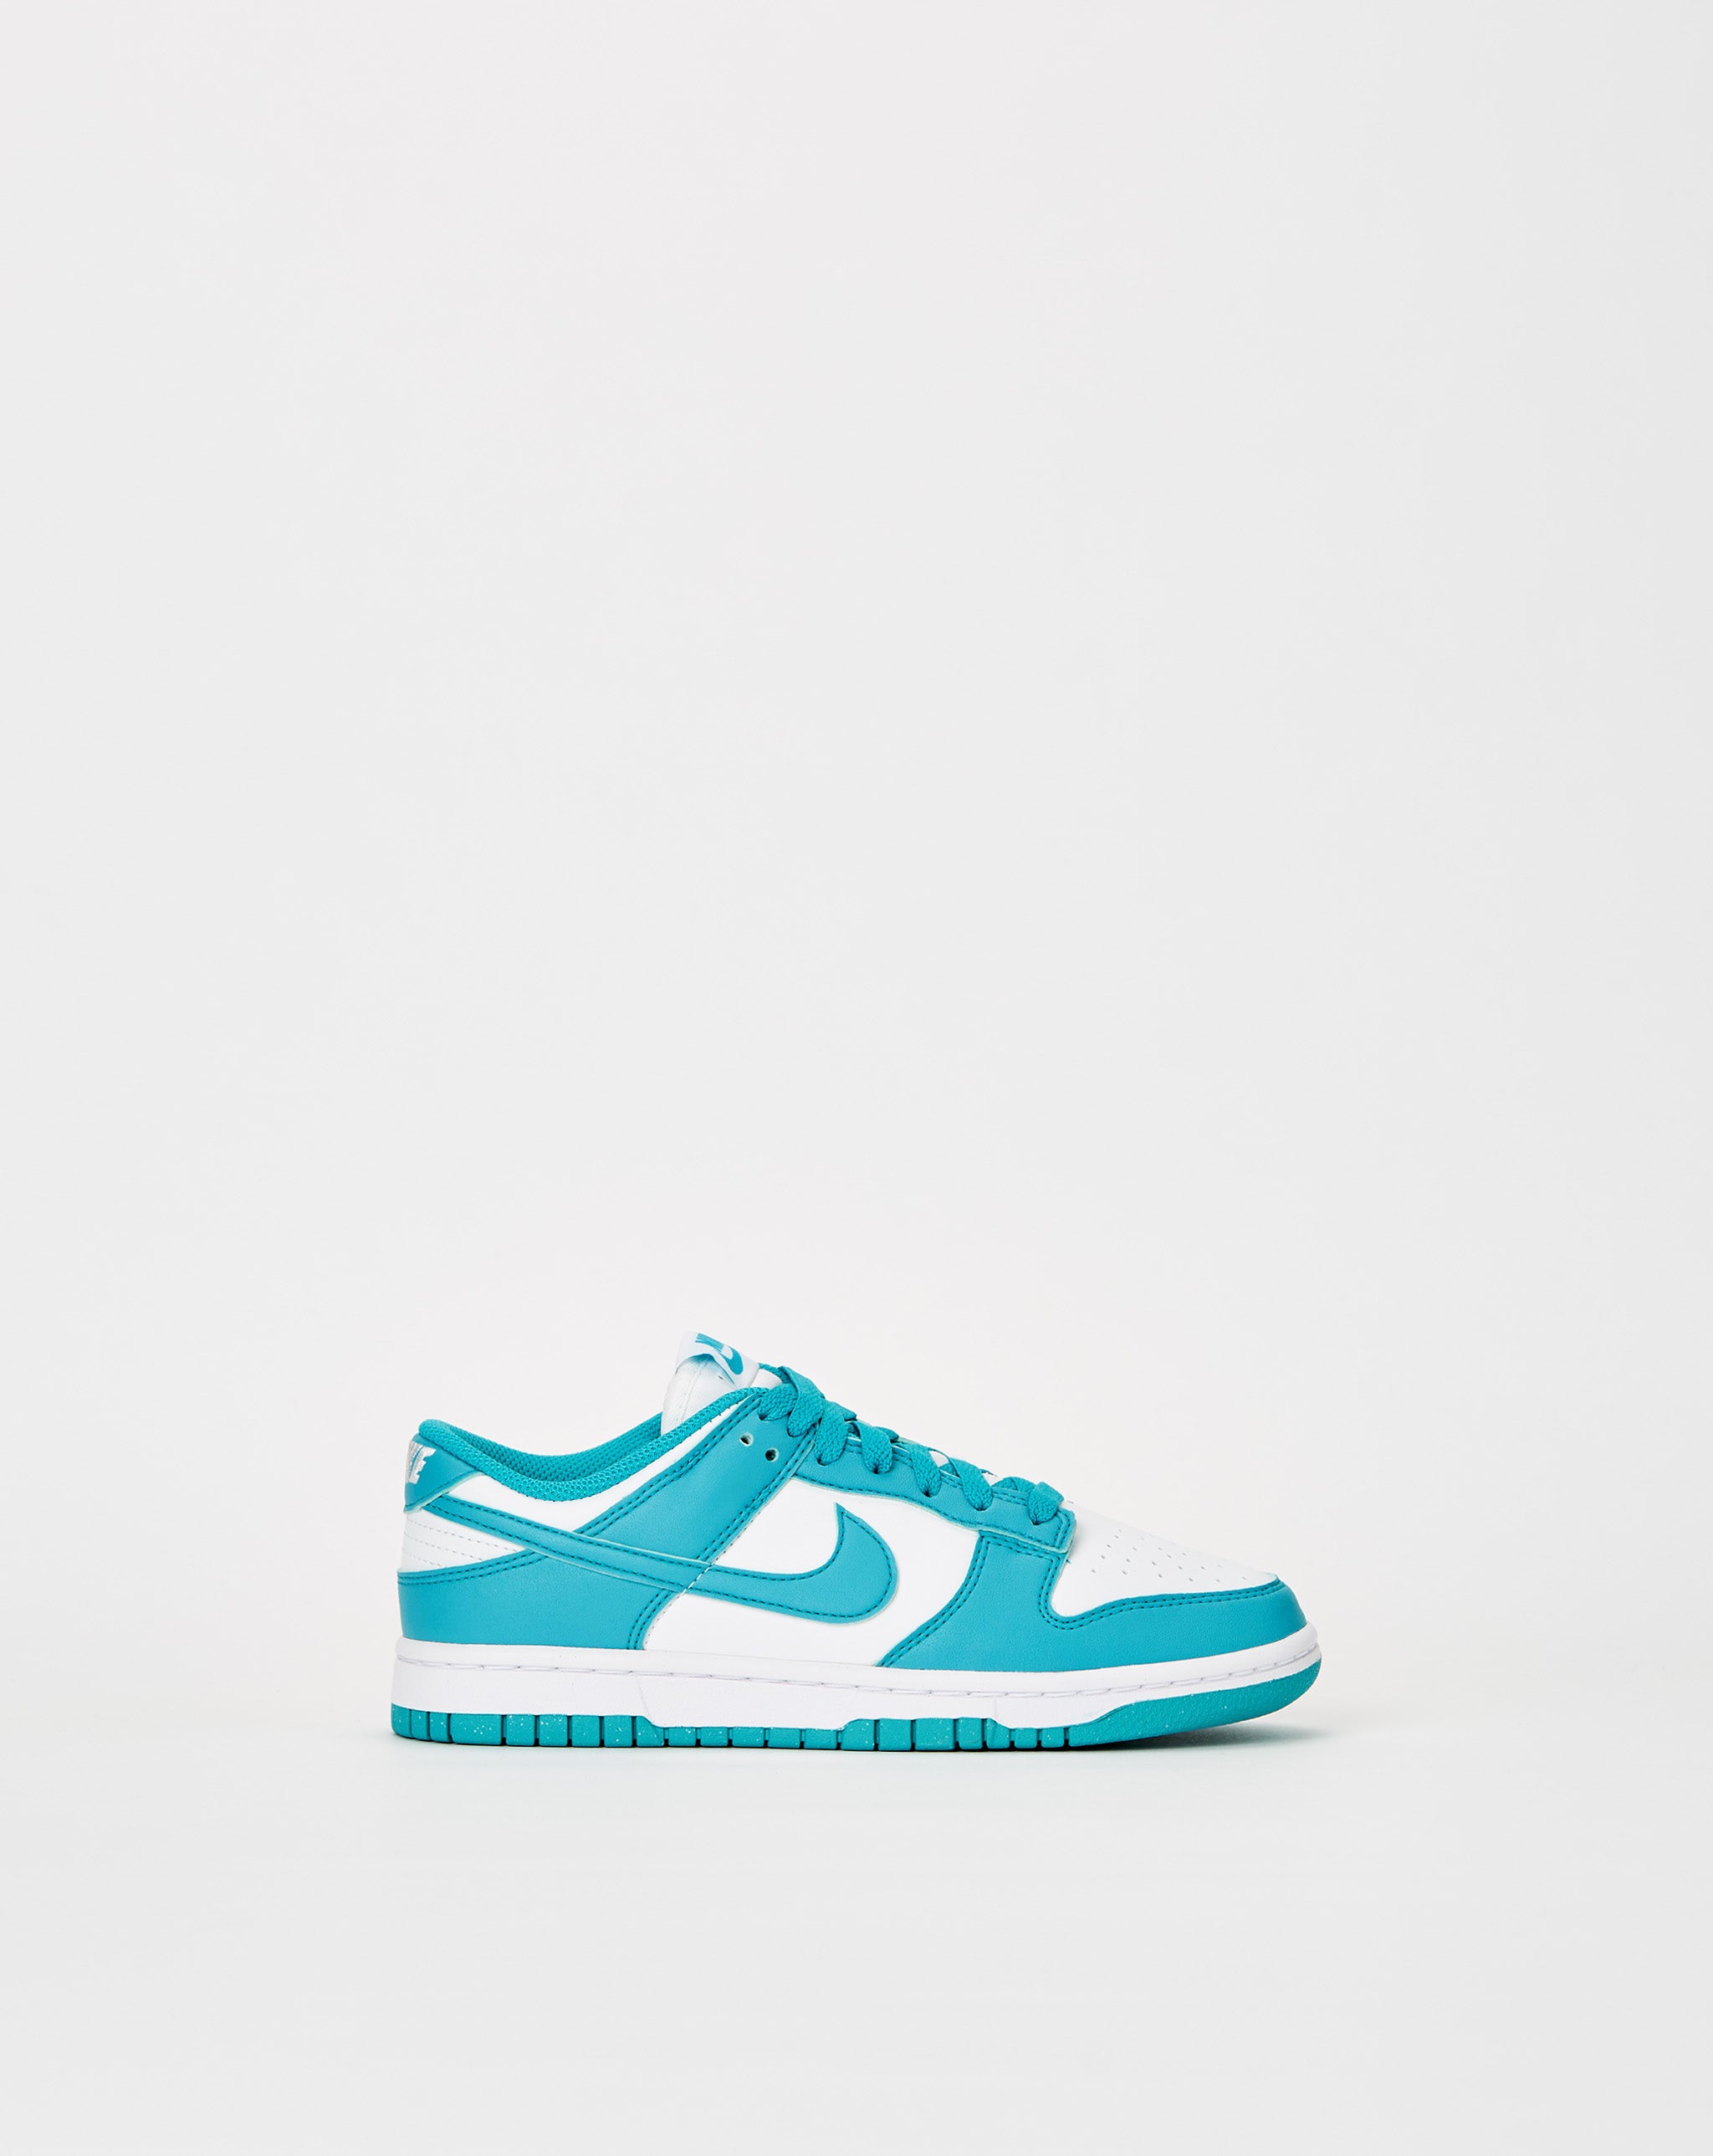 Nike nike shoes cool style images for girls boys women  - Cheap Urlfreeze Jordan outlet